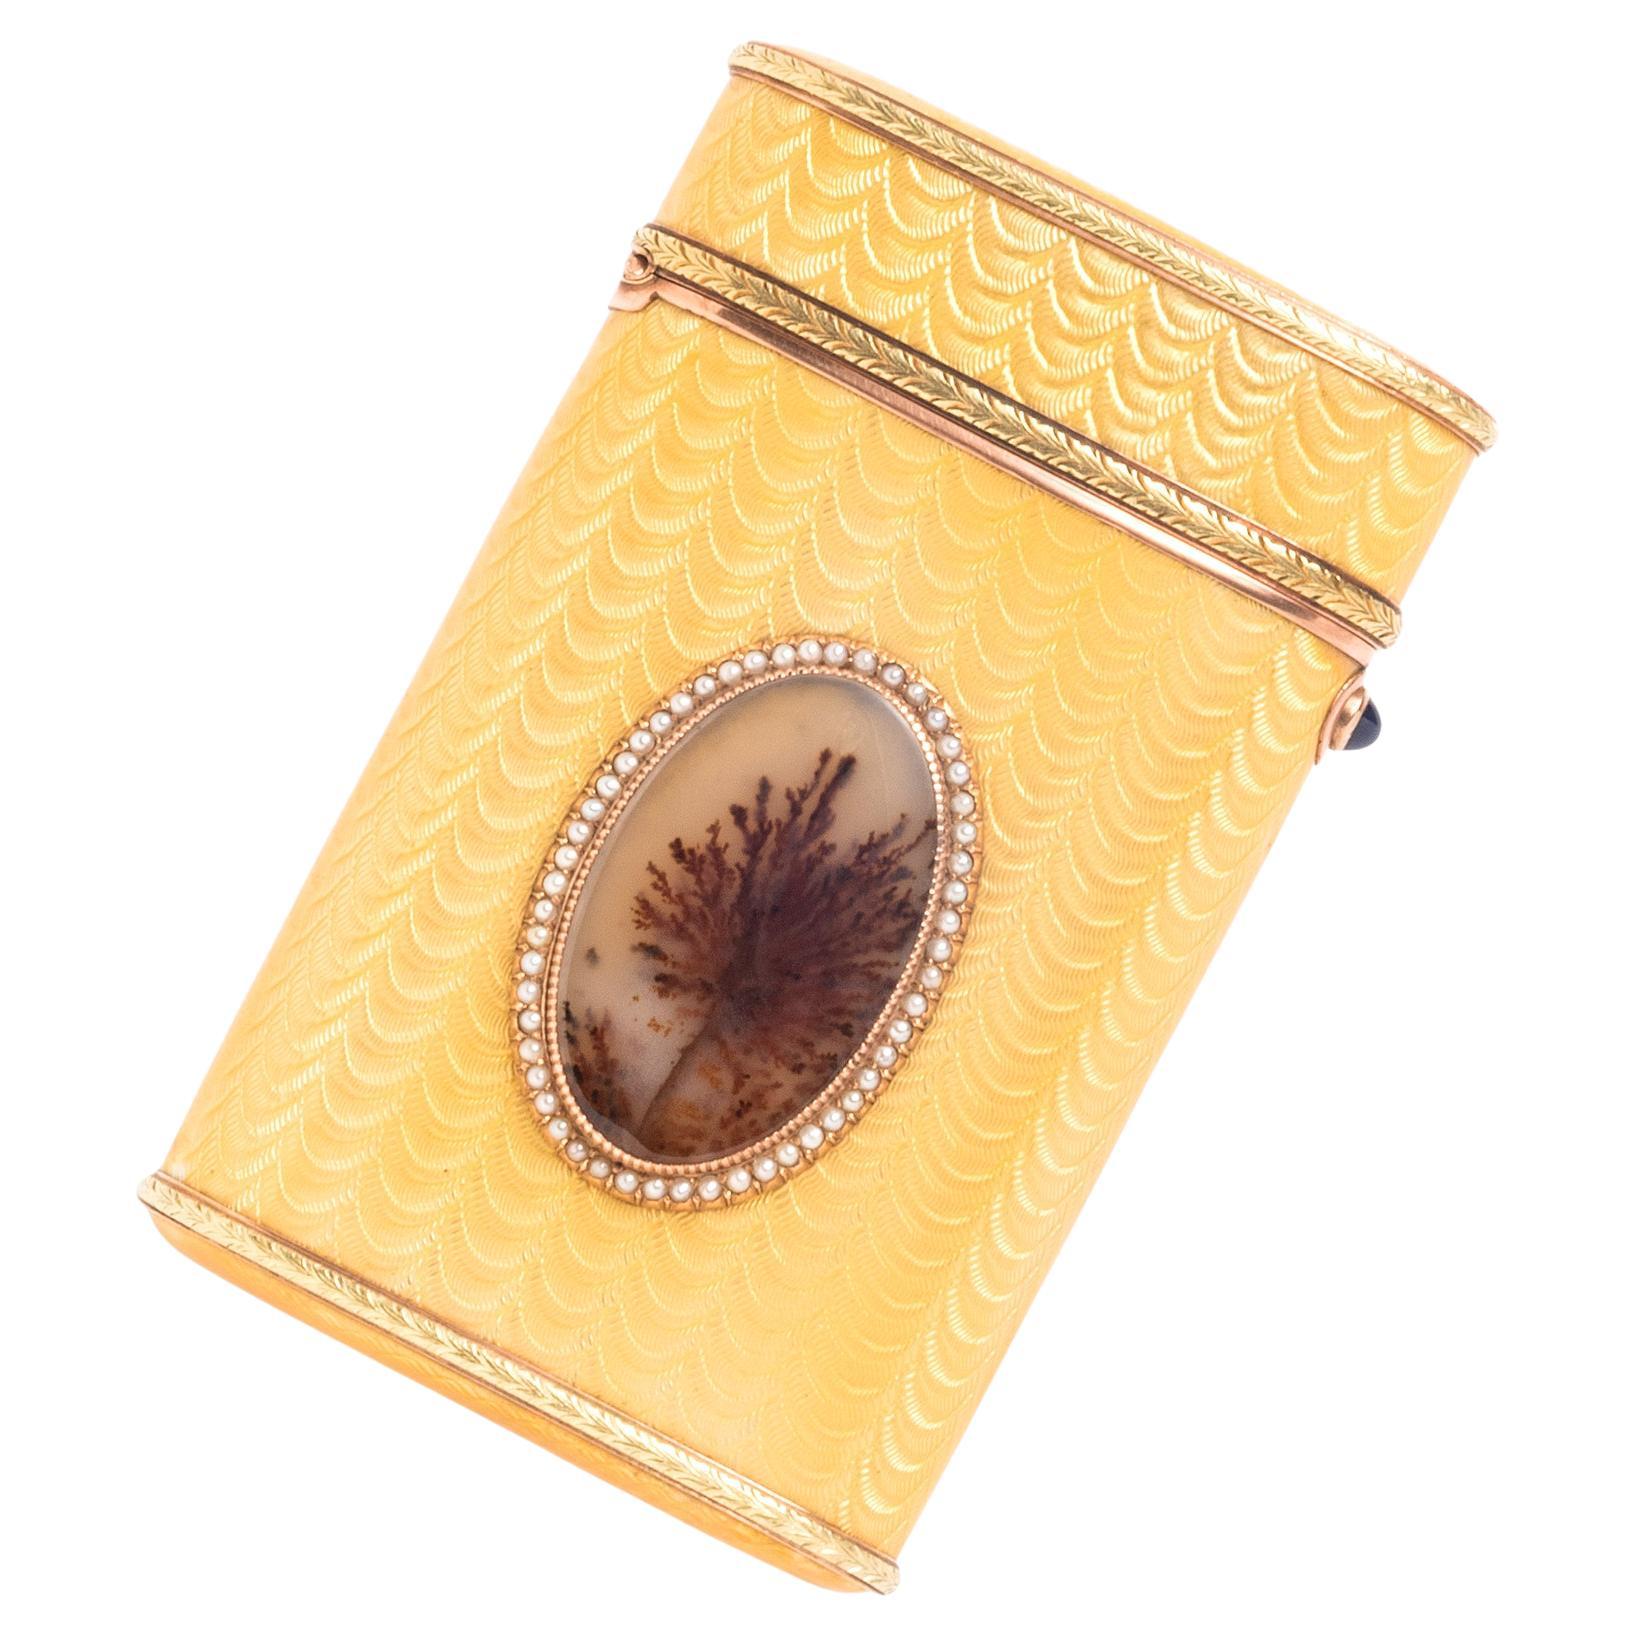 This bicolor gold and enamel cigarette case by Fabergé features an applied moss agate oval decoration set within a seed pearl and gold border. The body is decorated with yellow guilloche enamel and applied laurel bands at the base and cover. The